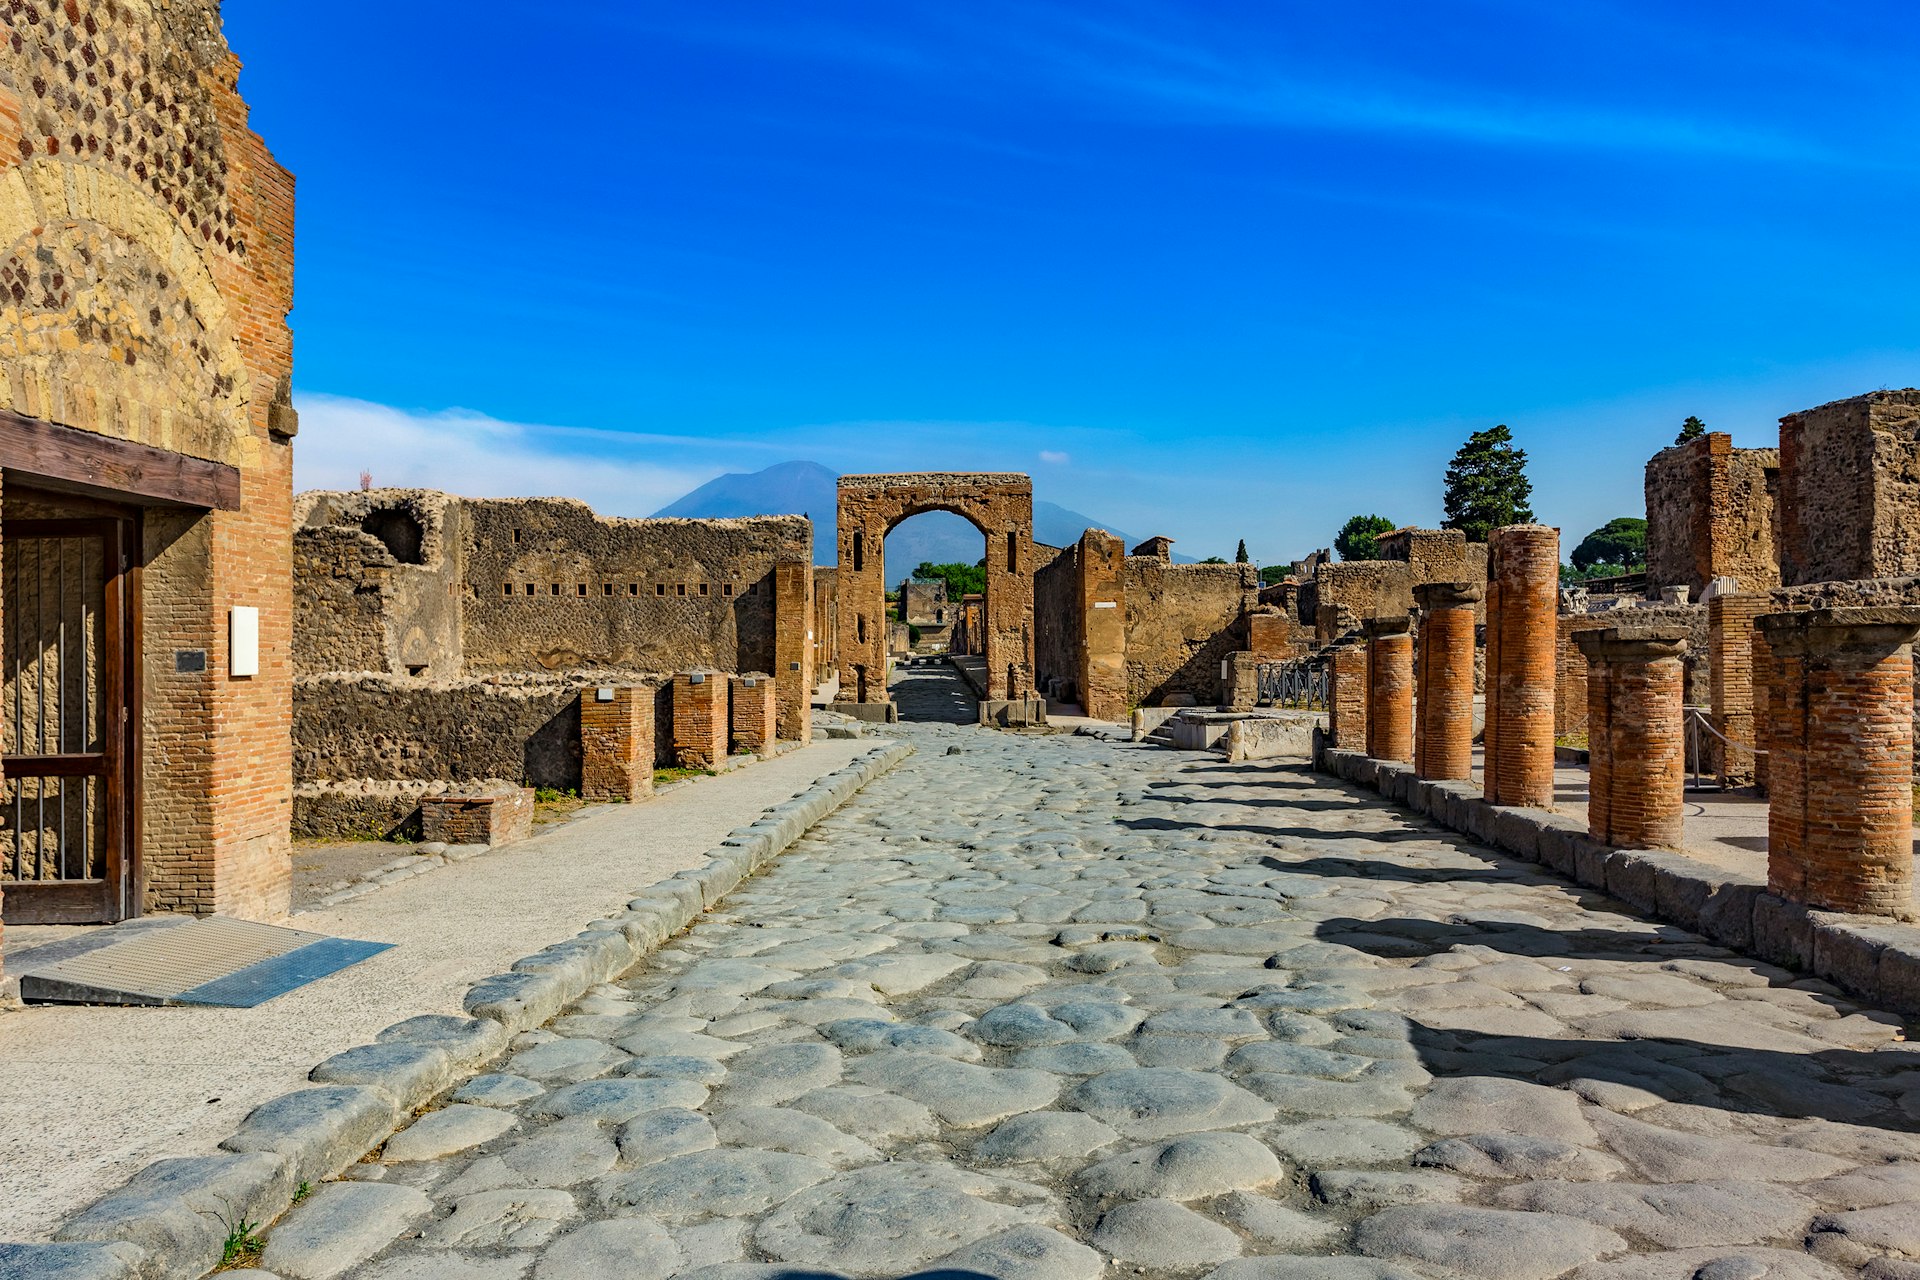 The ruins of Pompeii seen under a brilliant blue sky, with Mt Vesuvius in the distance